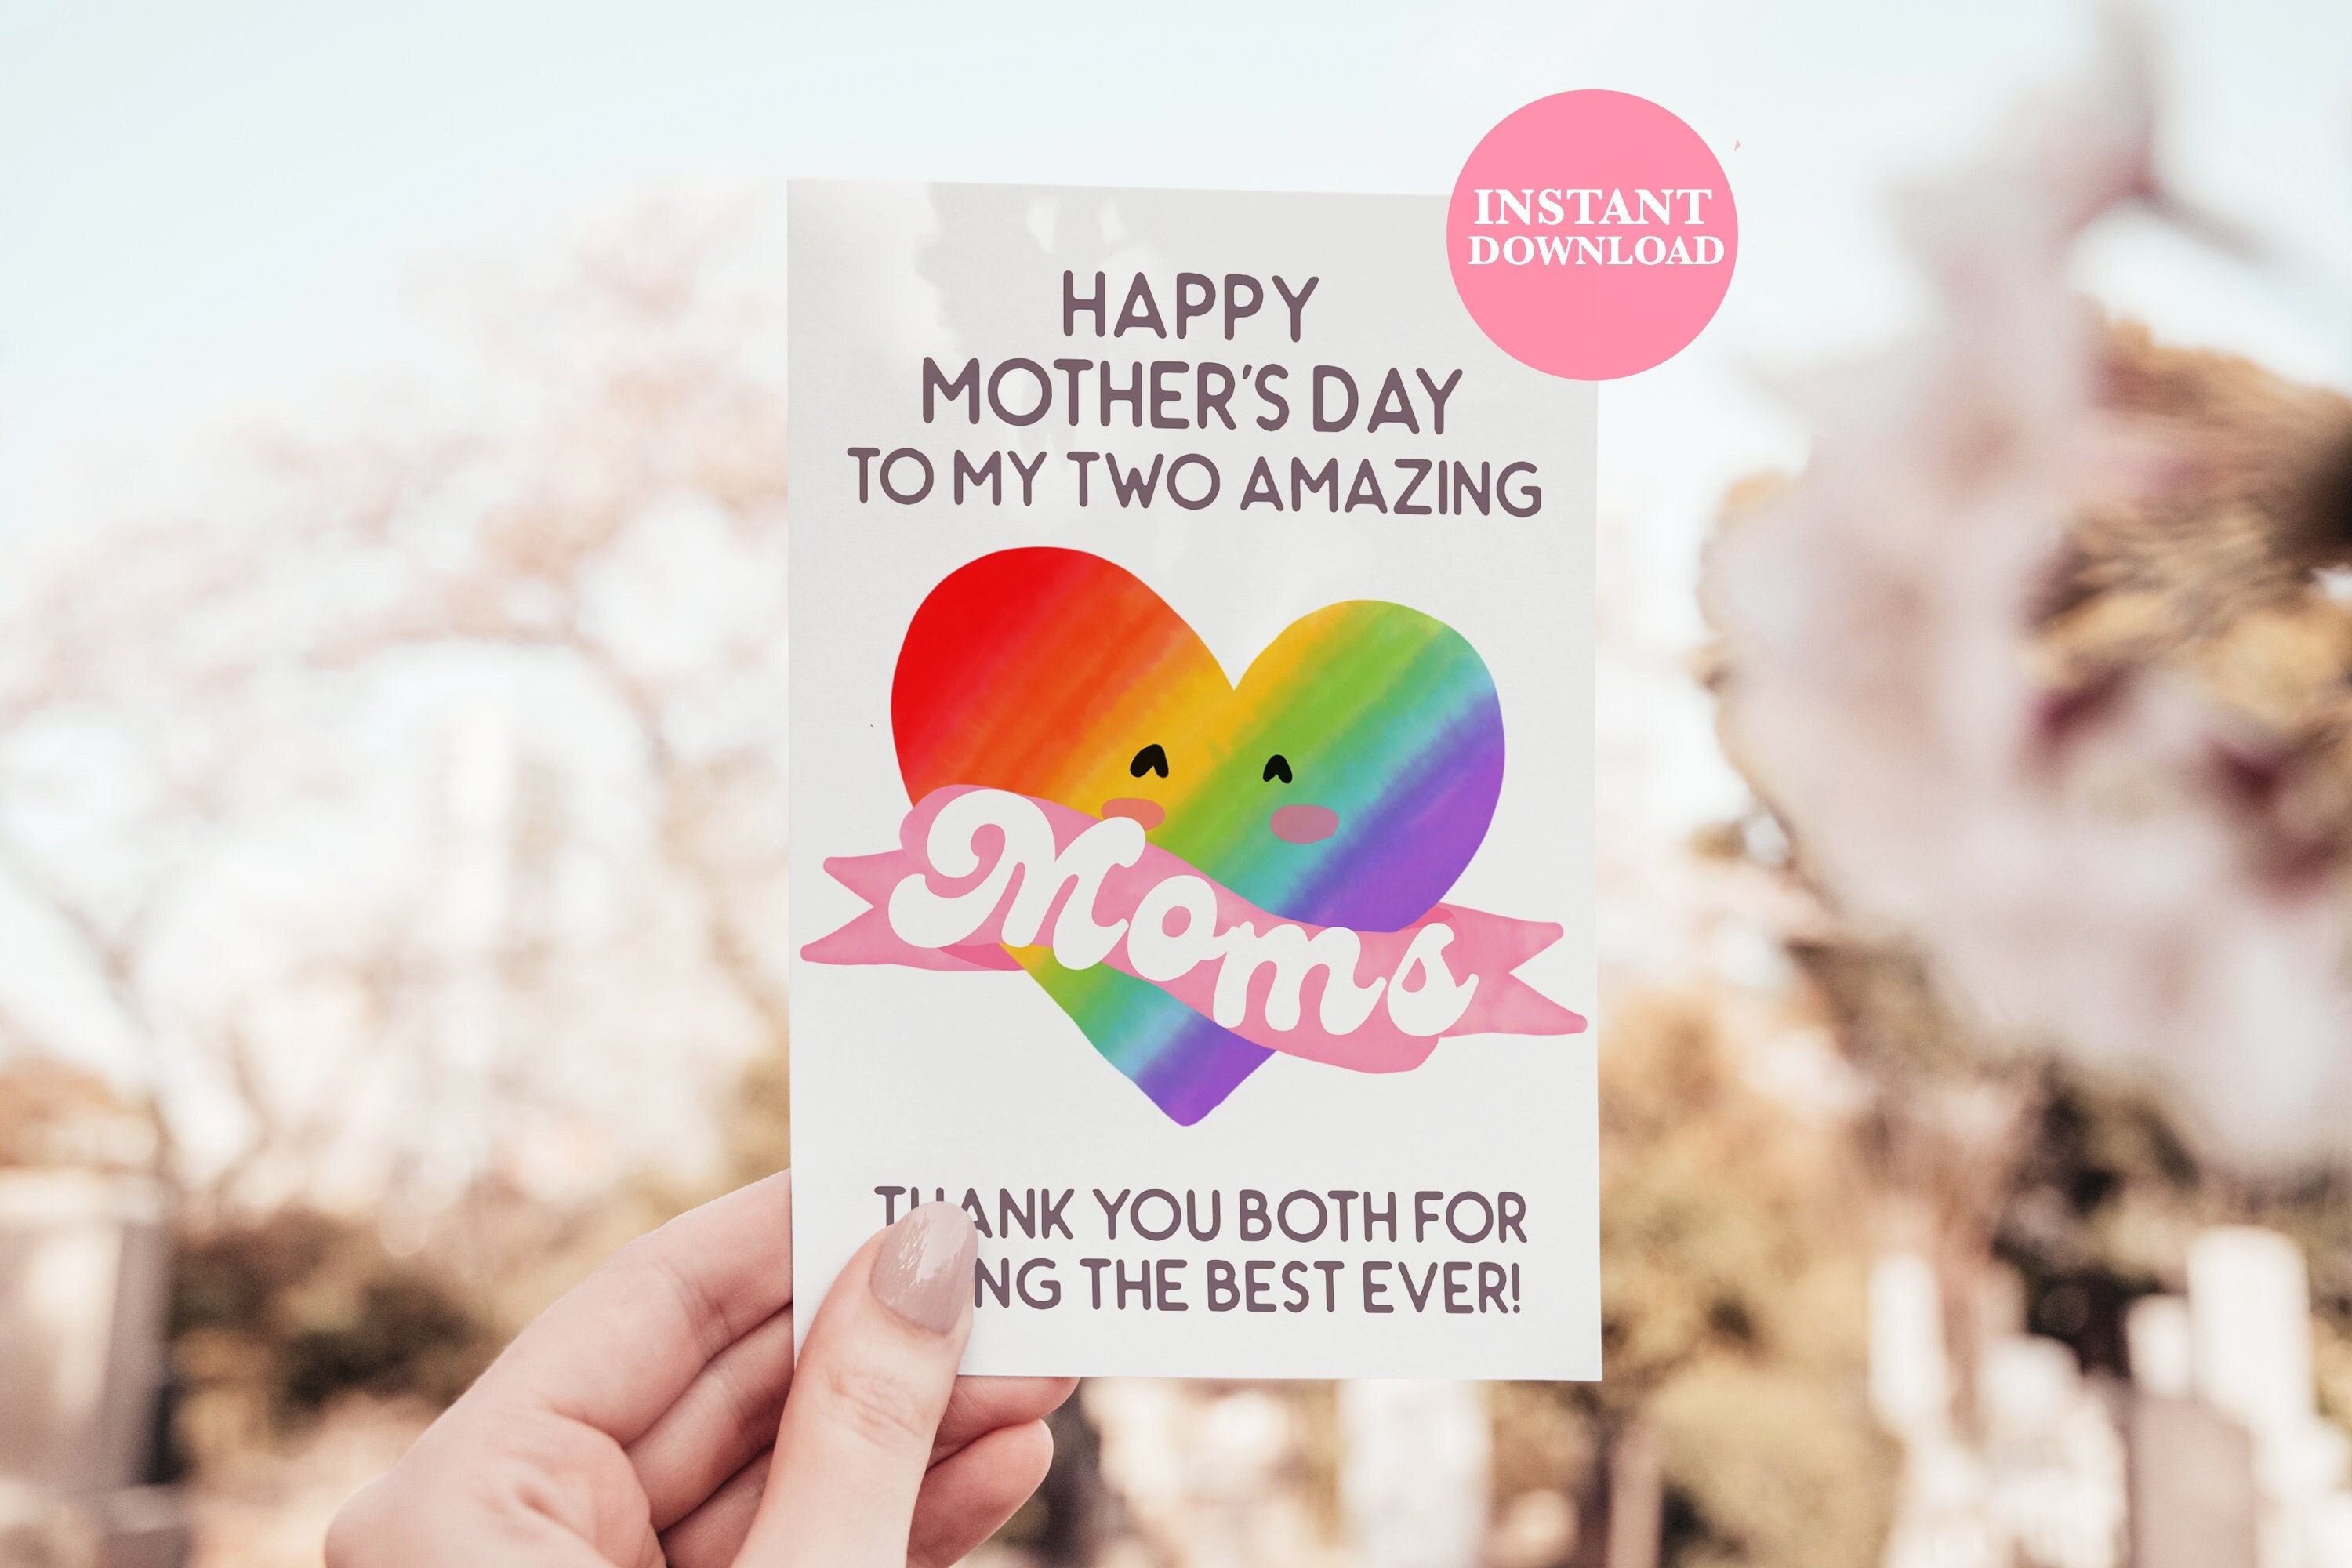 Happy Mother's Day by Apartment 2 Cards